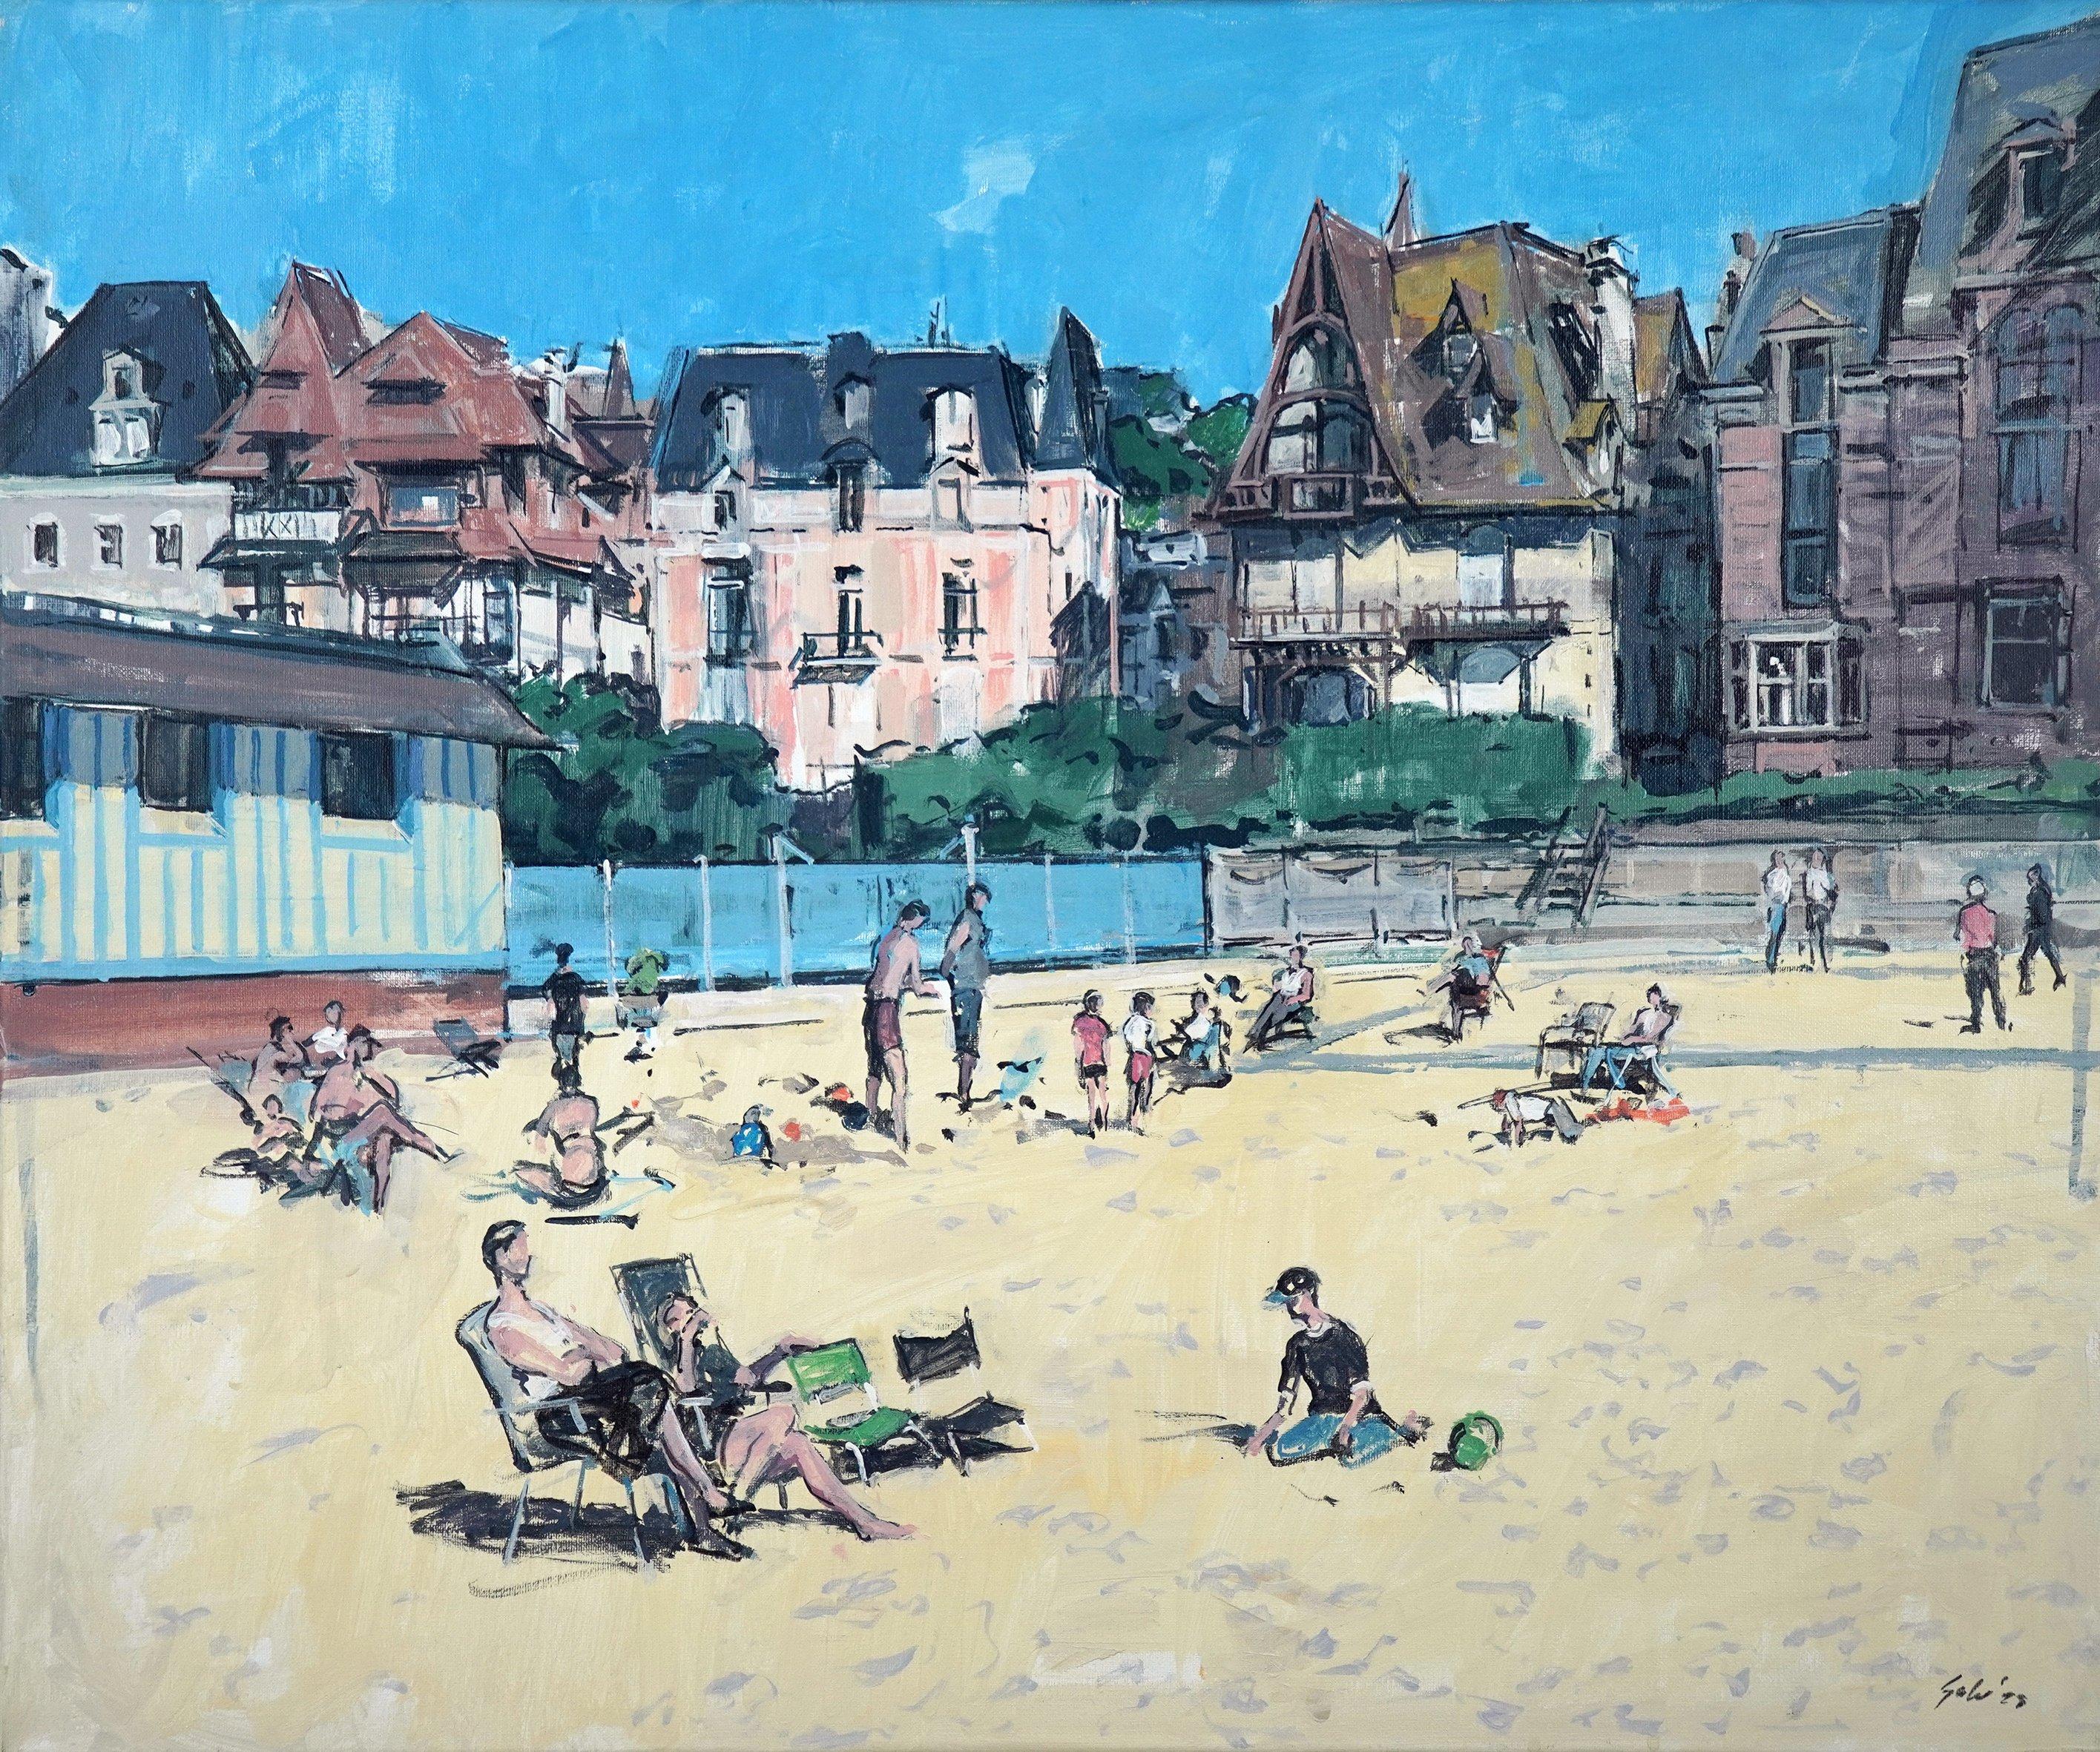 Sander van Walsum Landscape Painting - Sunny beach scene with beach houses in Trouville-sur-mer (France)